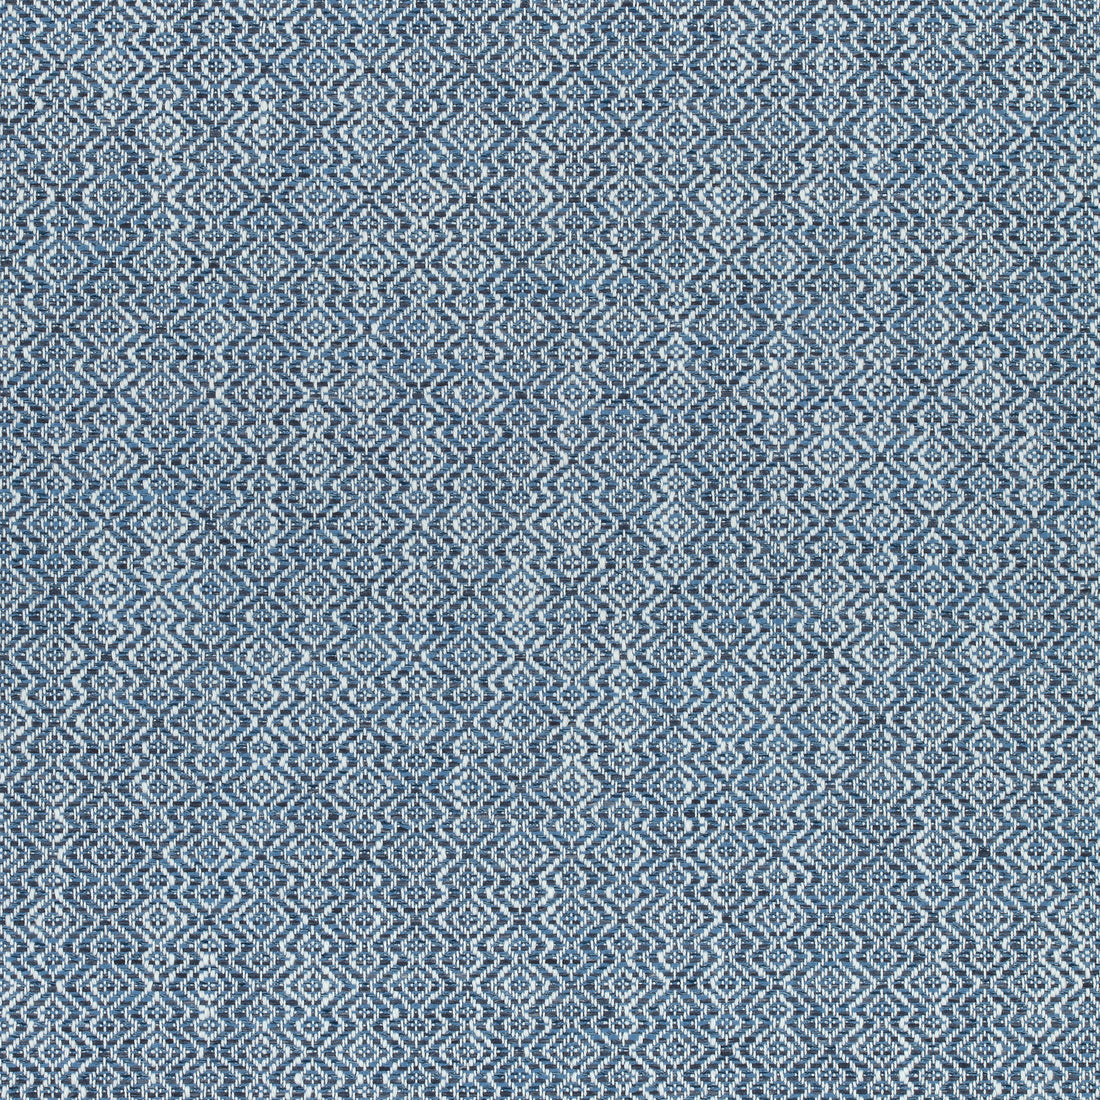 Kingsley fabric in royal blue color - pattern number W74070 - by Thibaut in the Cadence collection